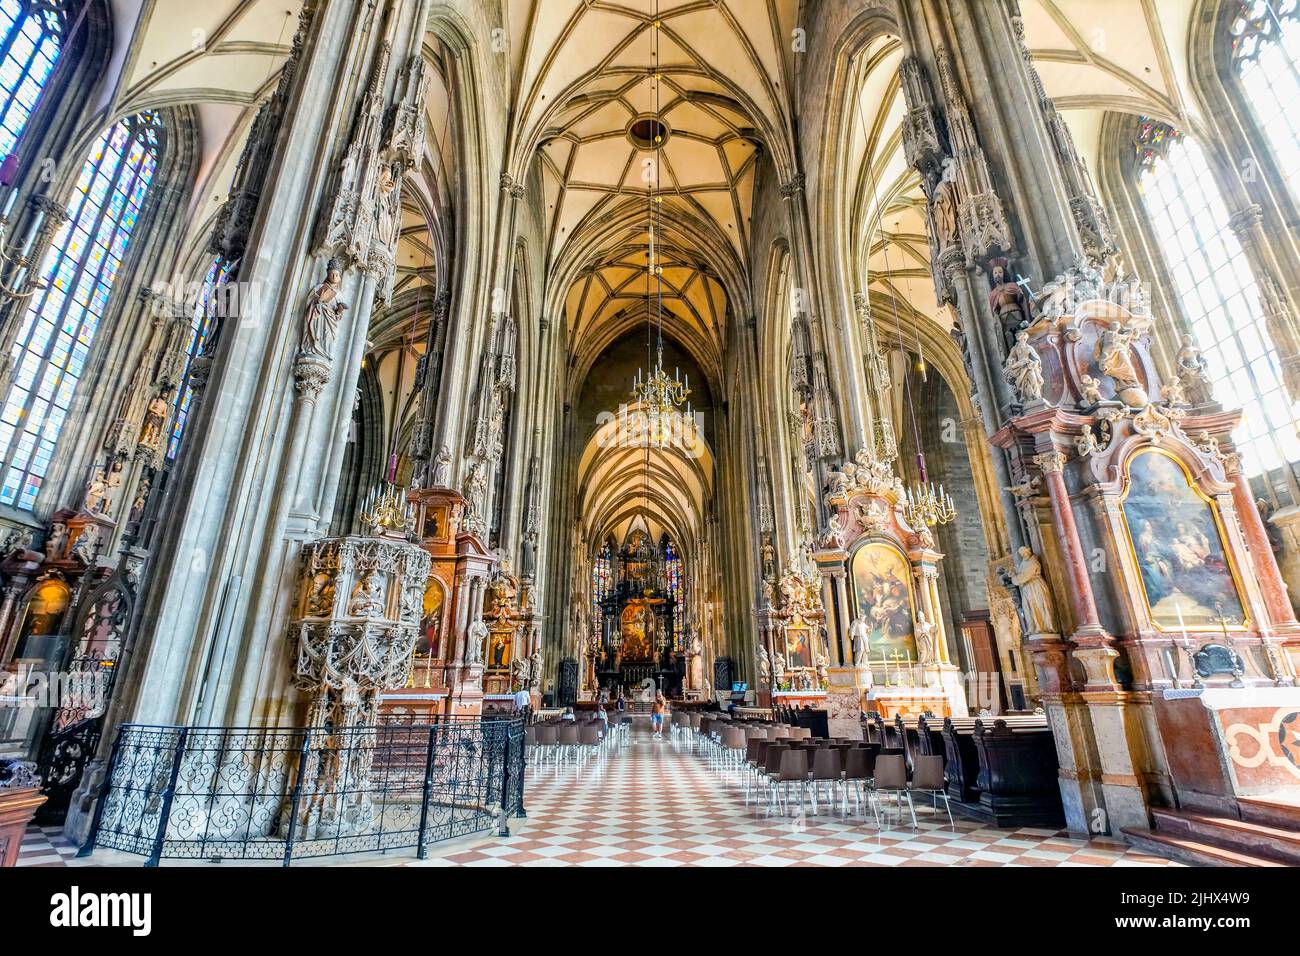 Inside St. Stephen's Cathedral in Vienna, Austria. The Cathedral is the mother church of the Roman Catholic Archdiocese of Vienna and the seat of the Stock Photo